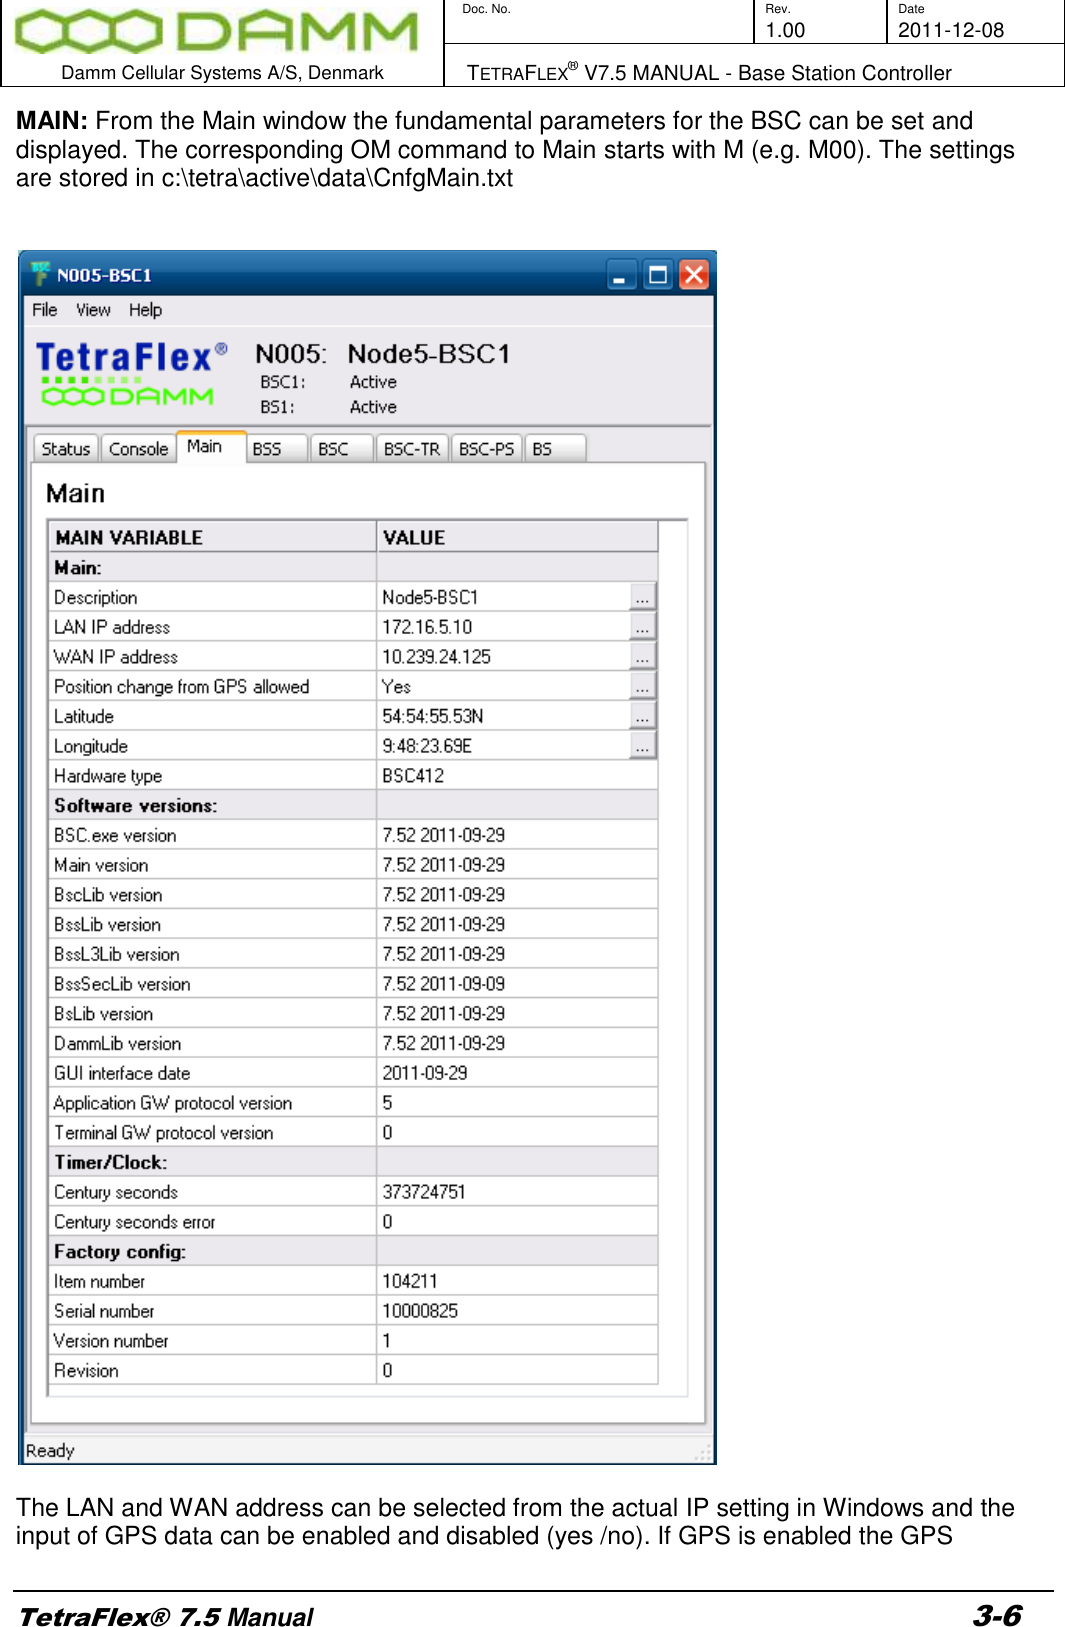        Doc. No. Rev. Date     1.00 2011-12-08  Damm Cellular Systems A/S, Denmark   TETRAFLEX® V7.5 MANUAL - Base Station Controller  TetraFlex® 7.5 Manual 3-6 MAIN: From the Main window the fundamental parameters for the BSC can be set and displayed. The corresponding OM command to Main starts with M (e.g. M00). The settings are stored in c:\tetra\active\data\CnfgMain.txt     The LAN and WAN address can be selected from the actual IP setting in Windows and the input of GPS data can be enabled and disabled (yes /no). If GPS is enabled the GPS 